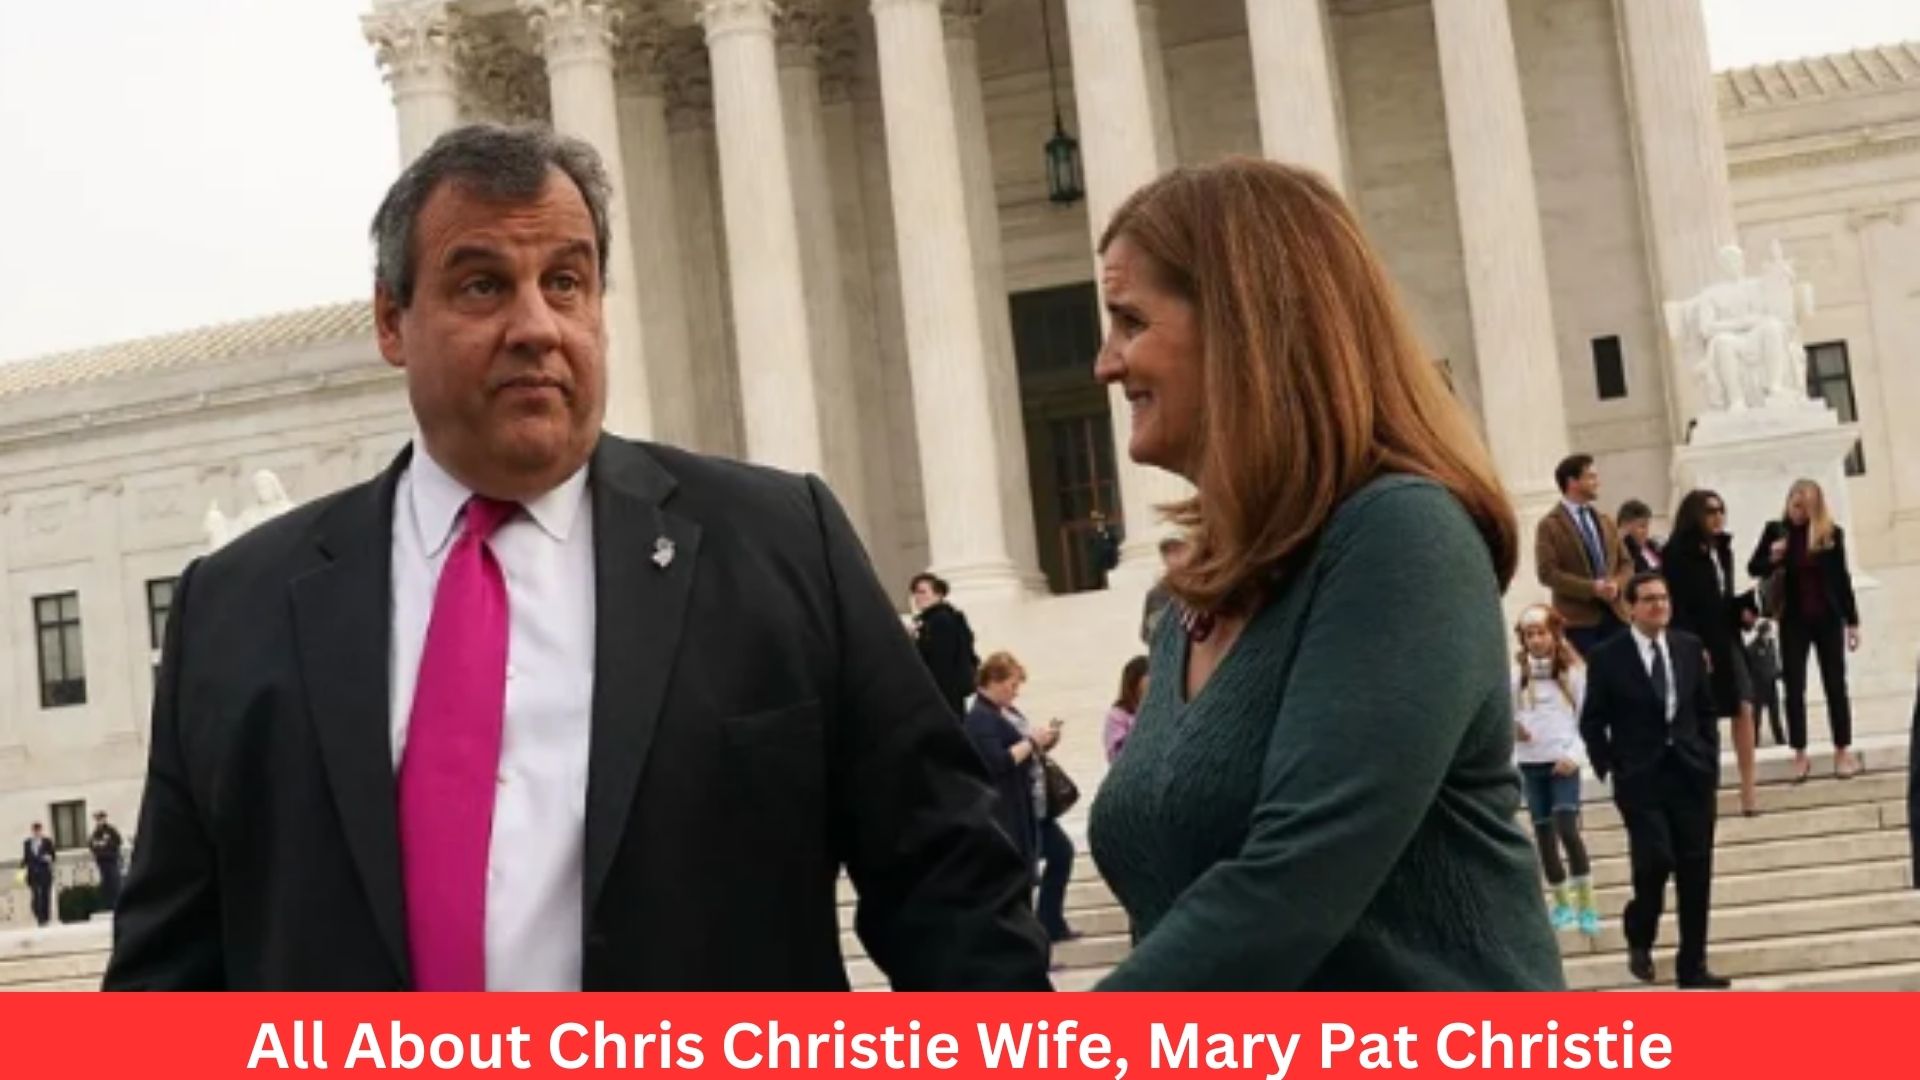 All About Chris Christie Wife, Mary Pat Christie